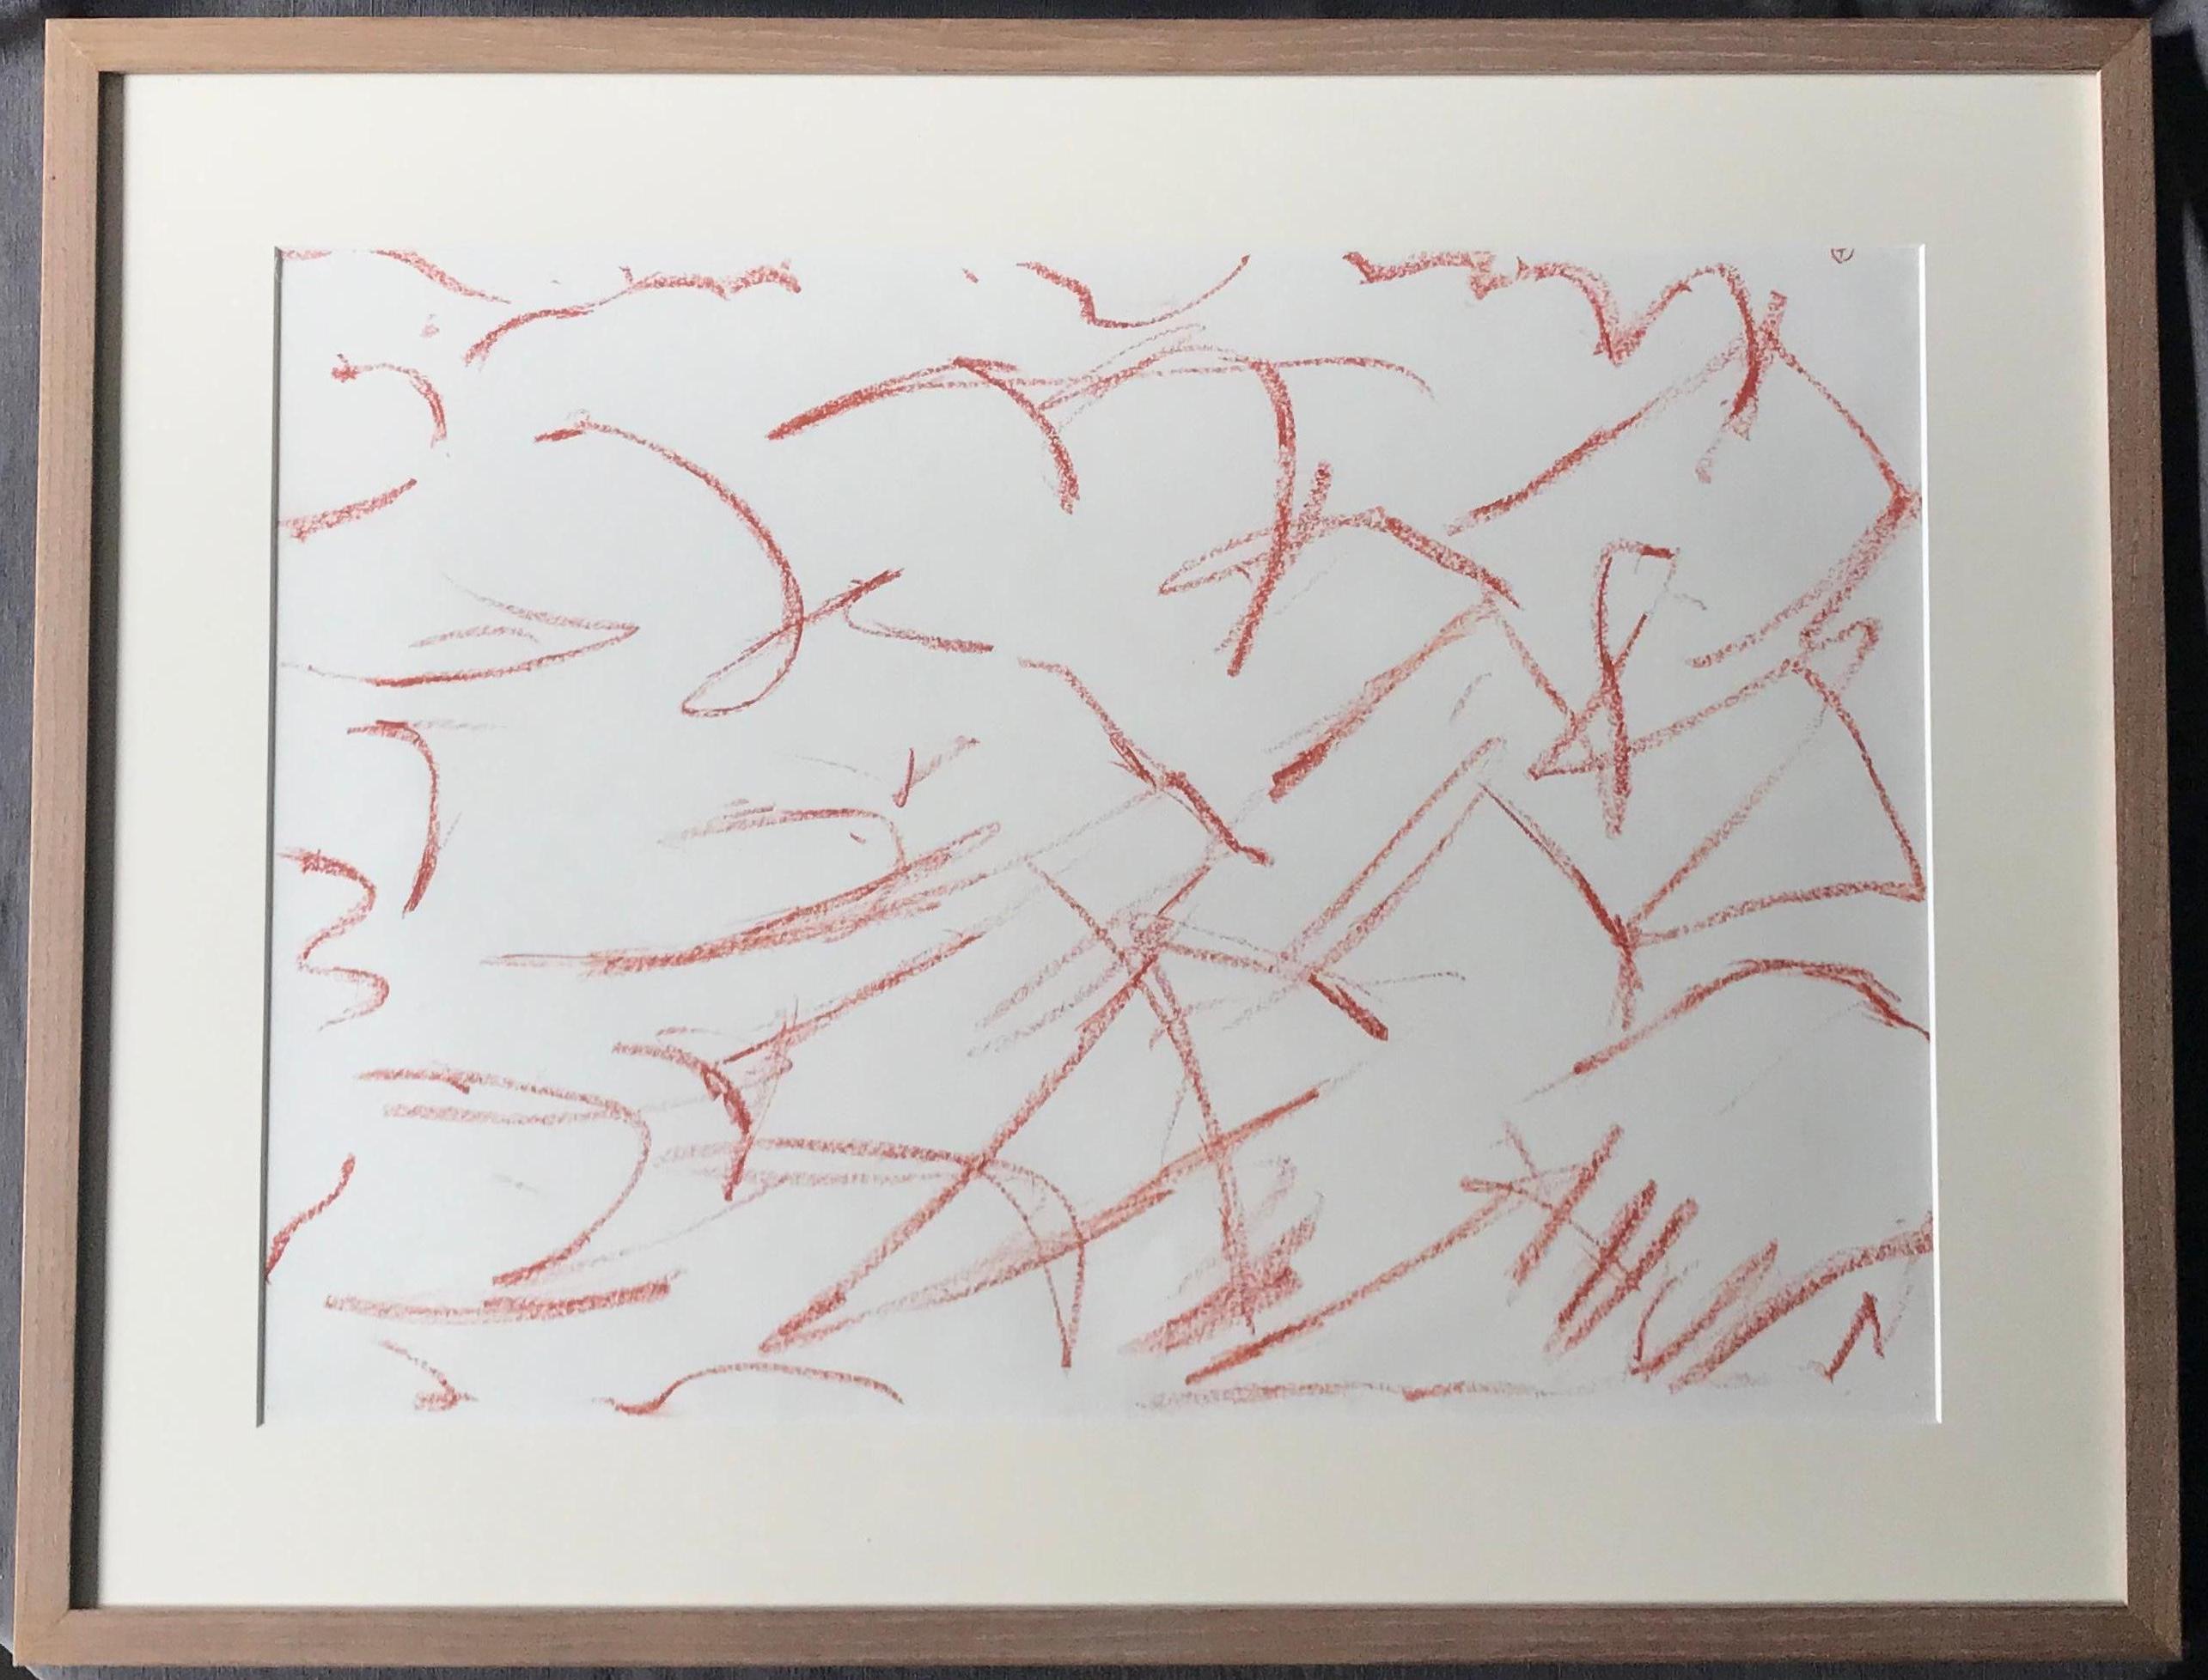 Contemporary red chalk drawing Mid-century drawing in terracotta chalk lines in the manner of Twombly in contemporary mat and wood frame. United States, mid-20th century
Dimensions: 29.5